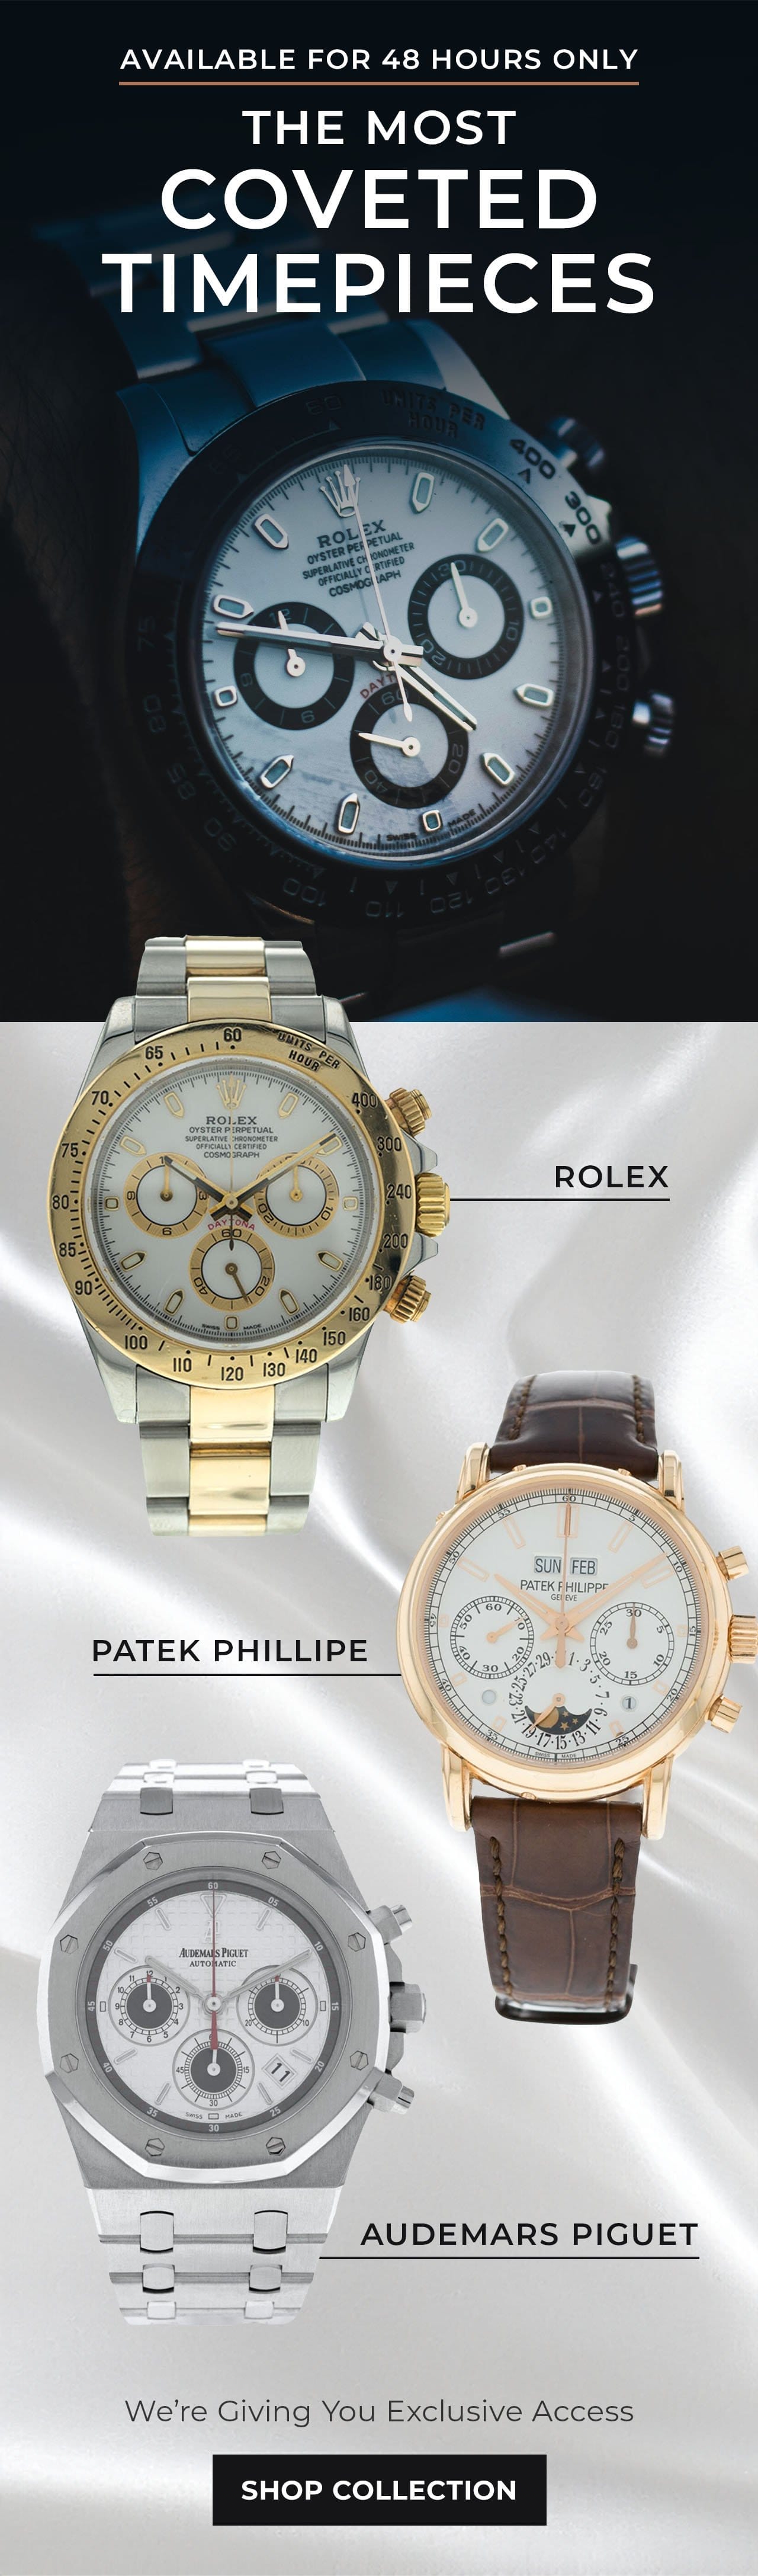 The Most Coveted Timepieces | SHOP NOW